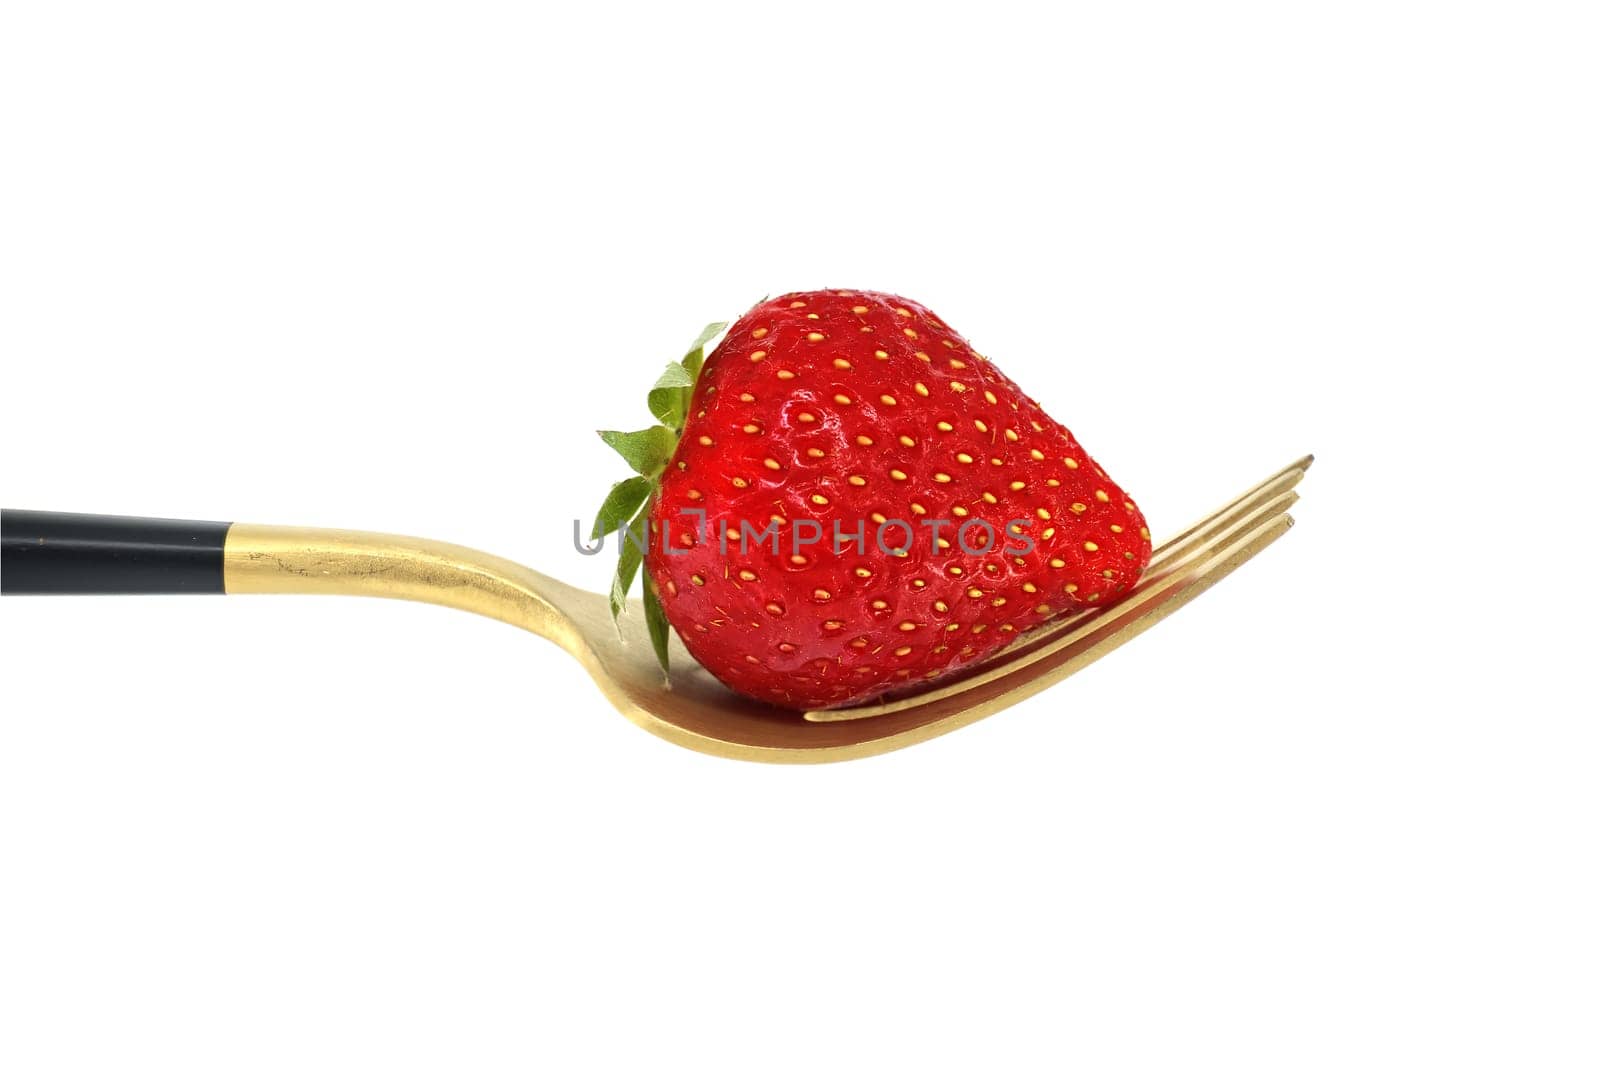 Red strawberry arranged on gold fork with a black handle, set against a white background, symbolizing a concept of healthy diet and organic food